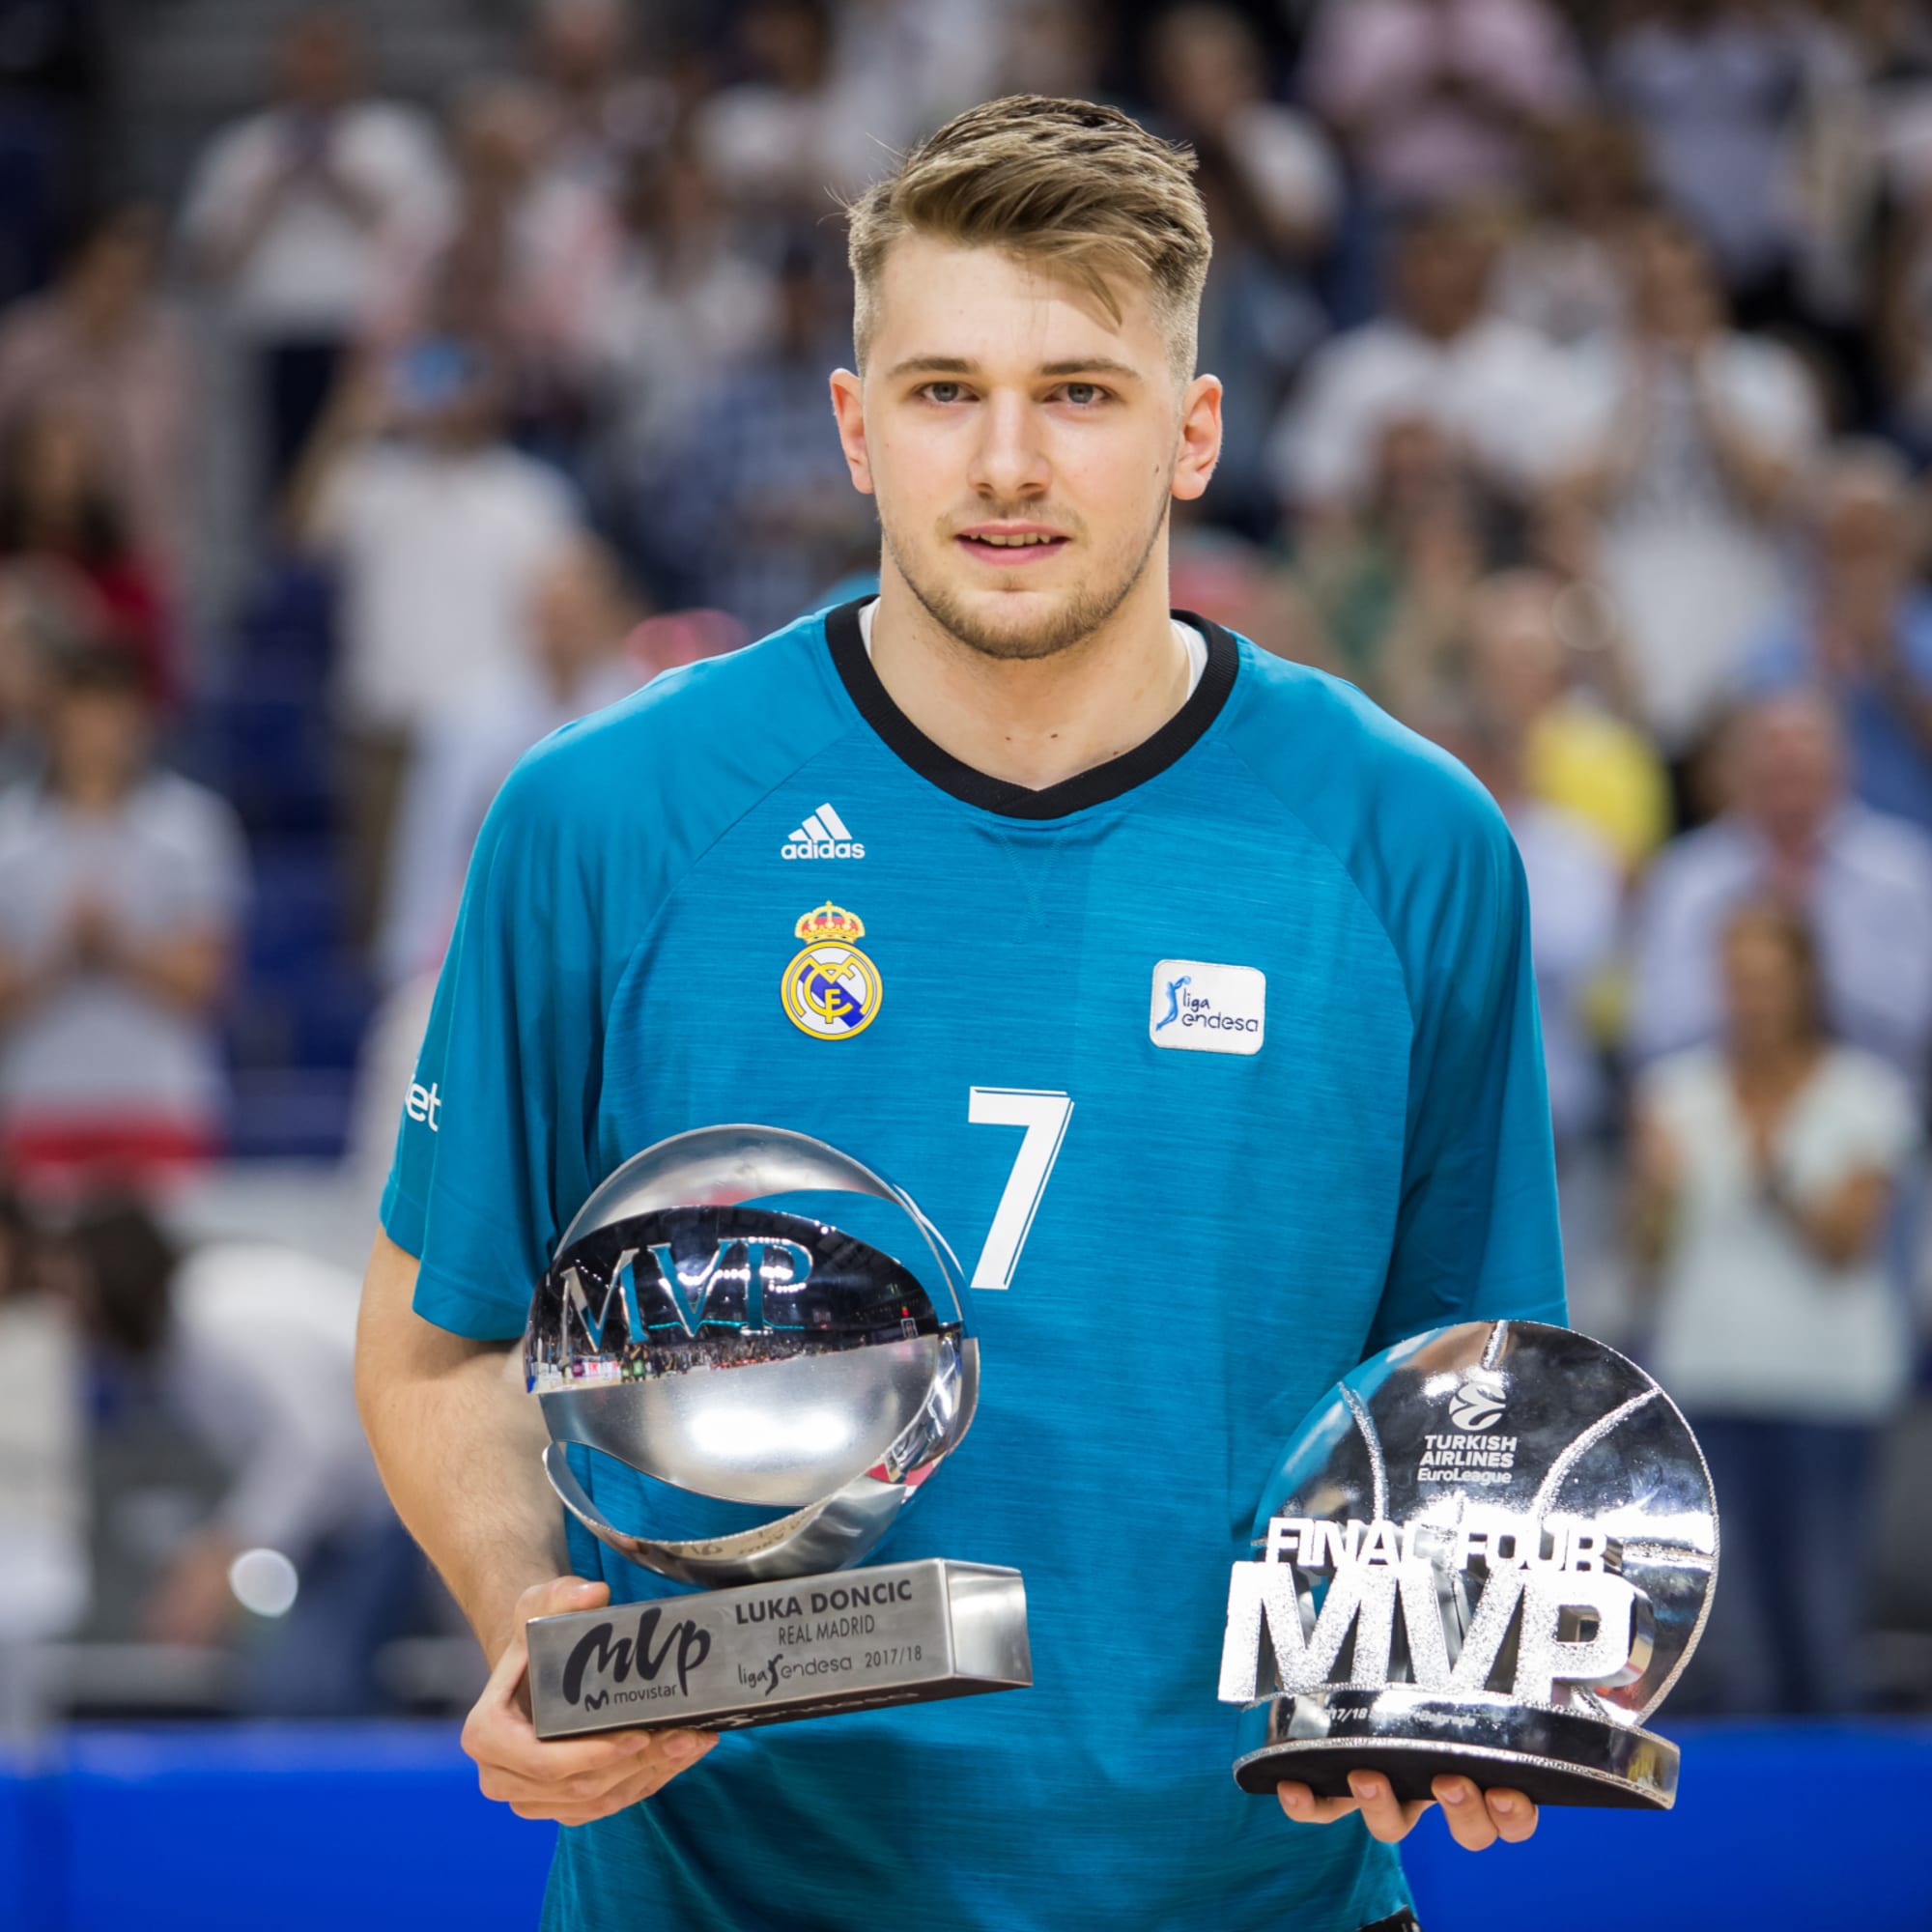 WHAT IF LUKA DONČIĆ WAS DRAFTED BY THE HAWKS? 